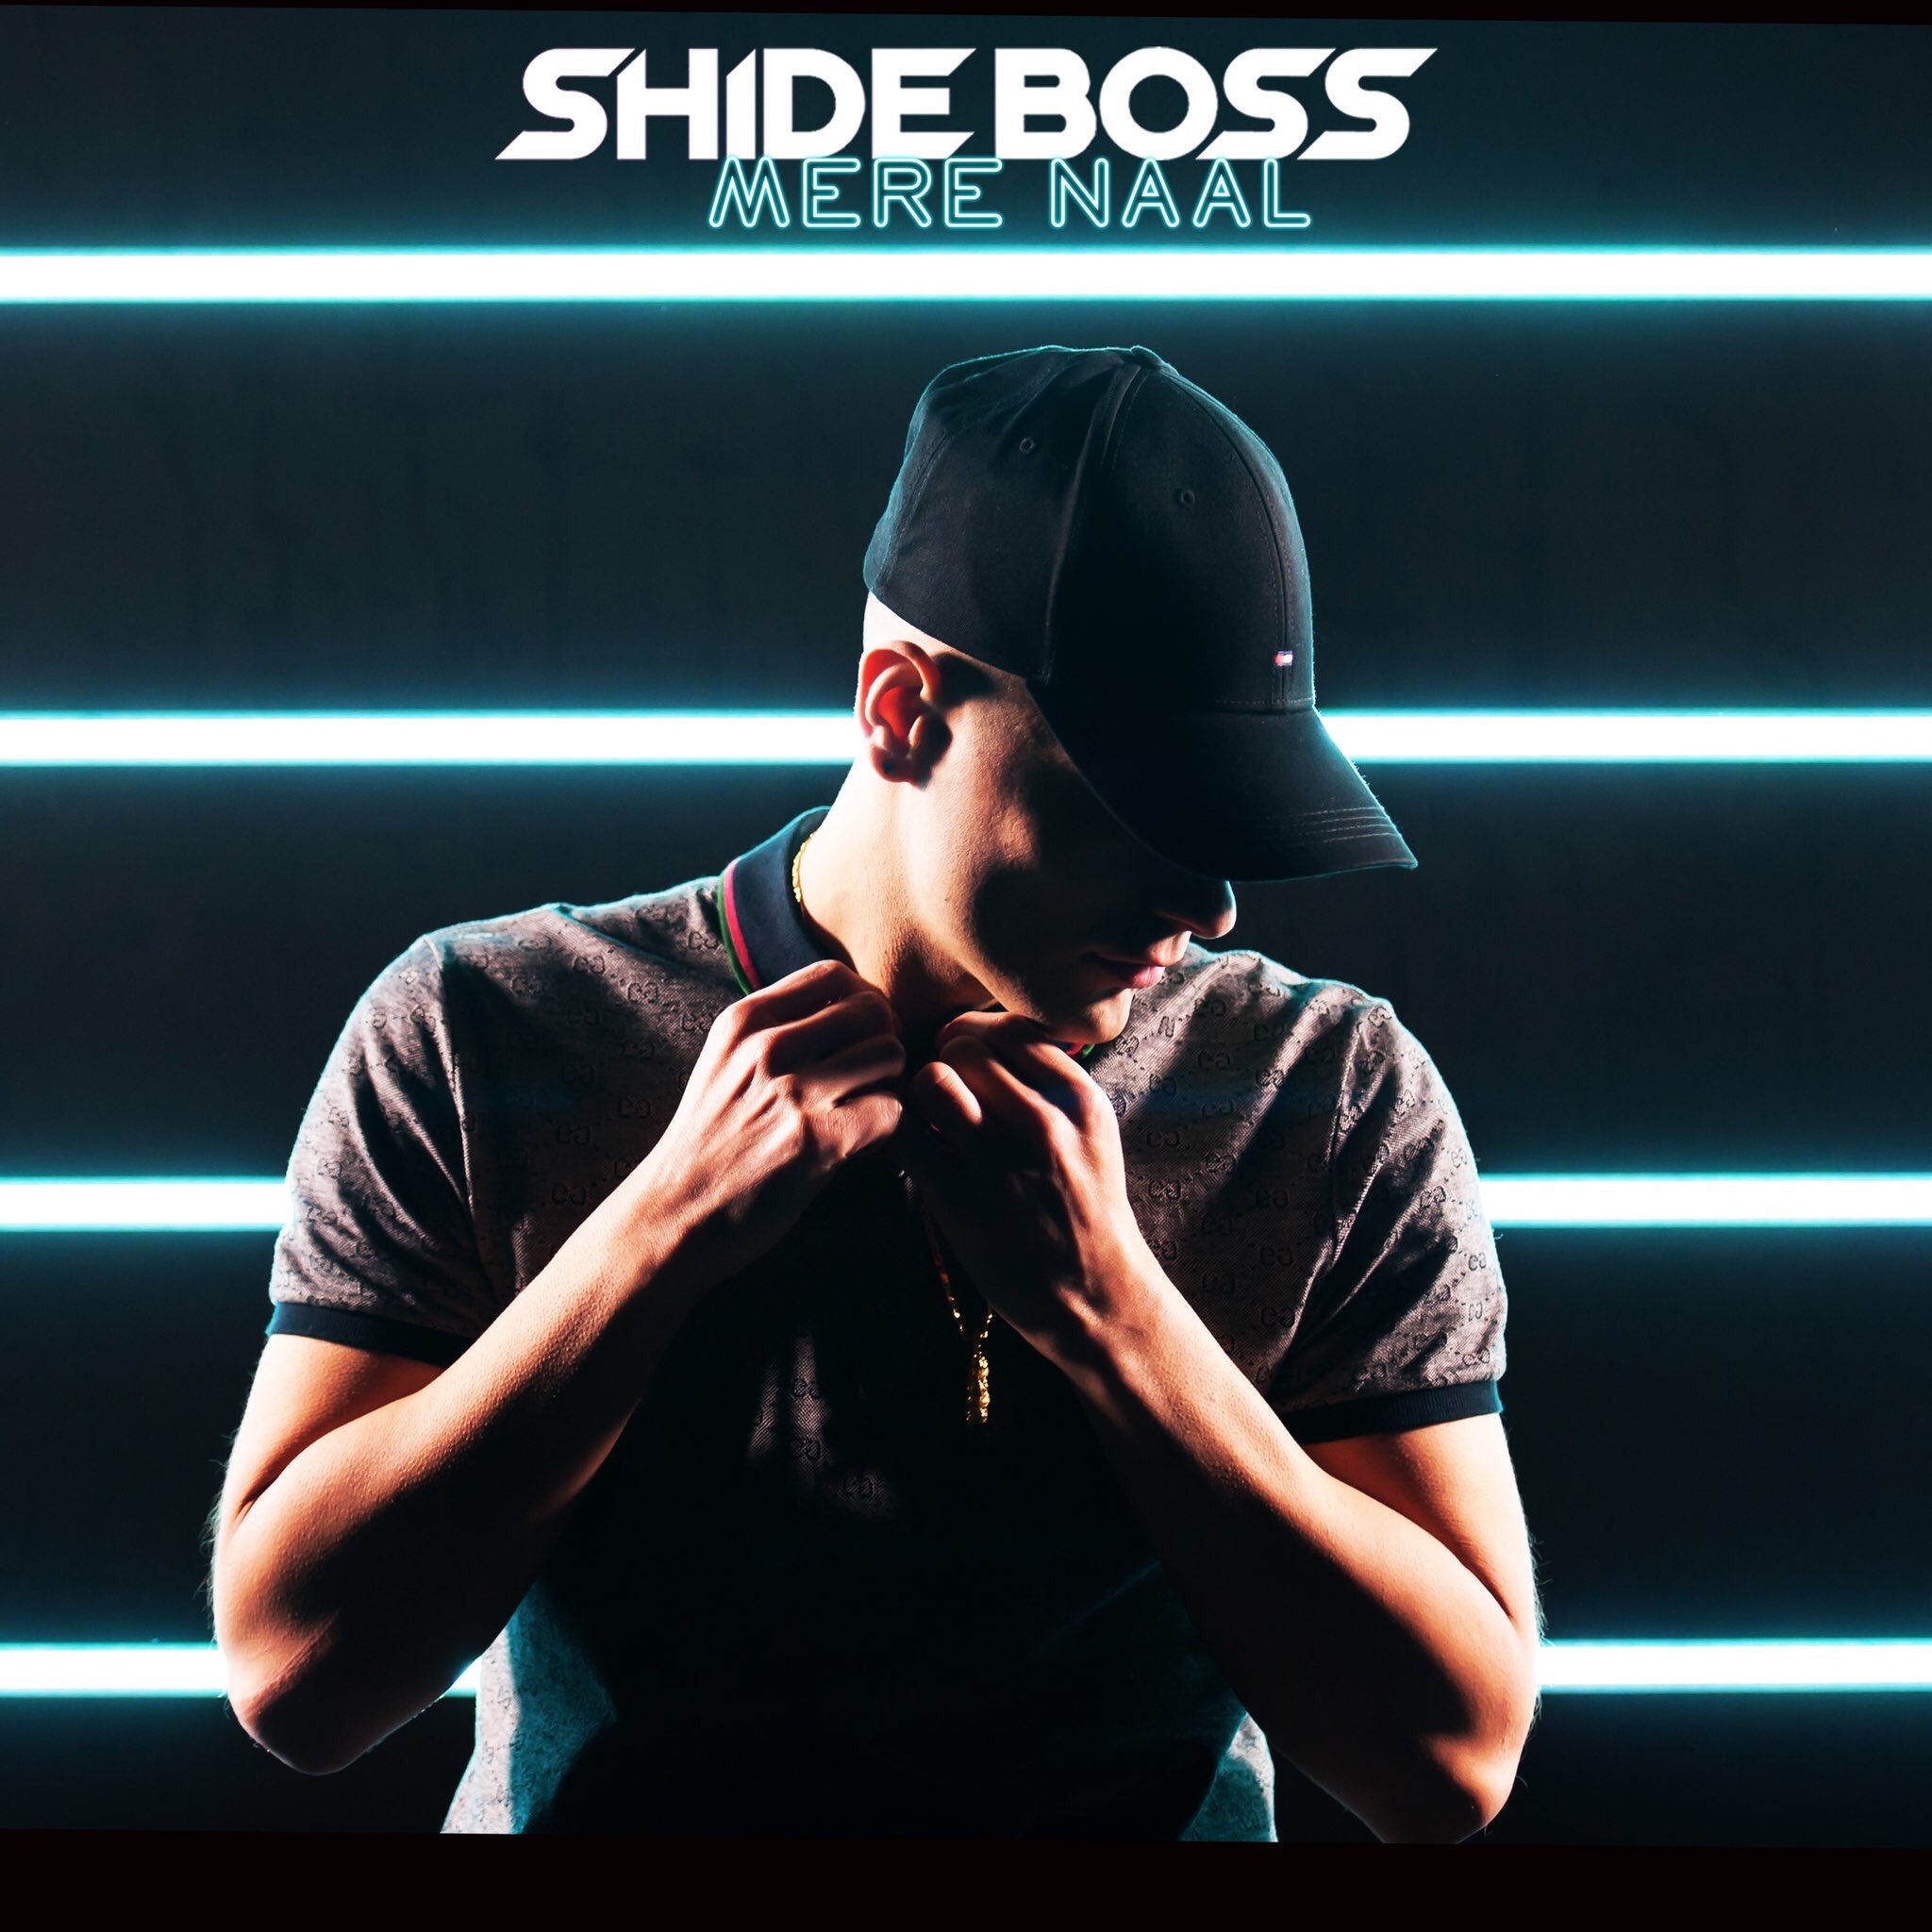 EXCLUSIVE: Shide Boss opens up about latest single Mere Naal